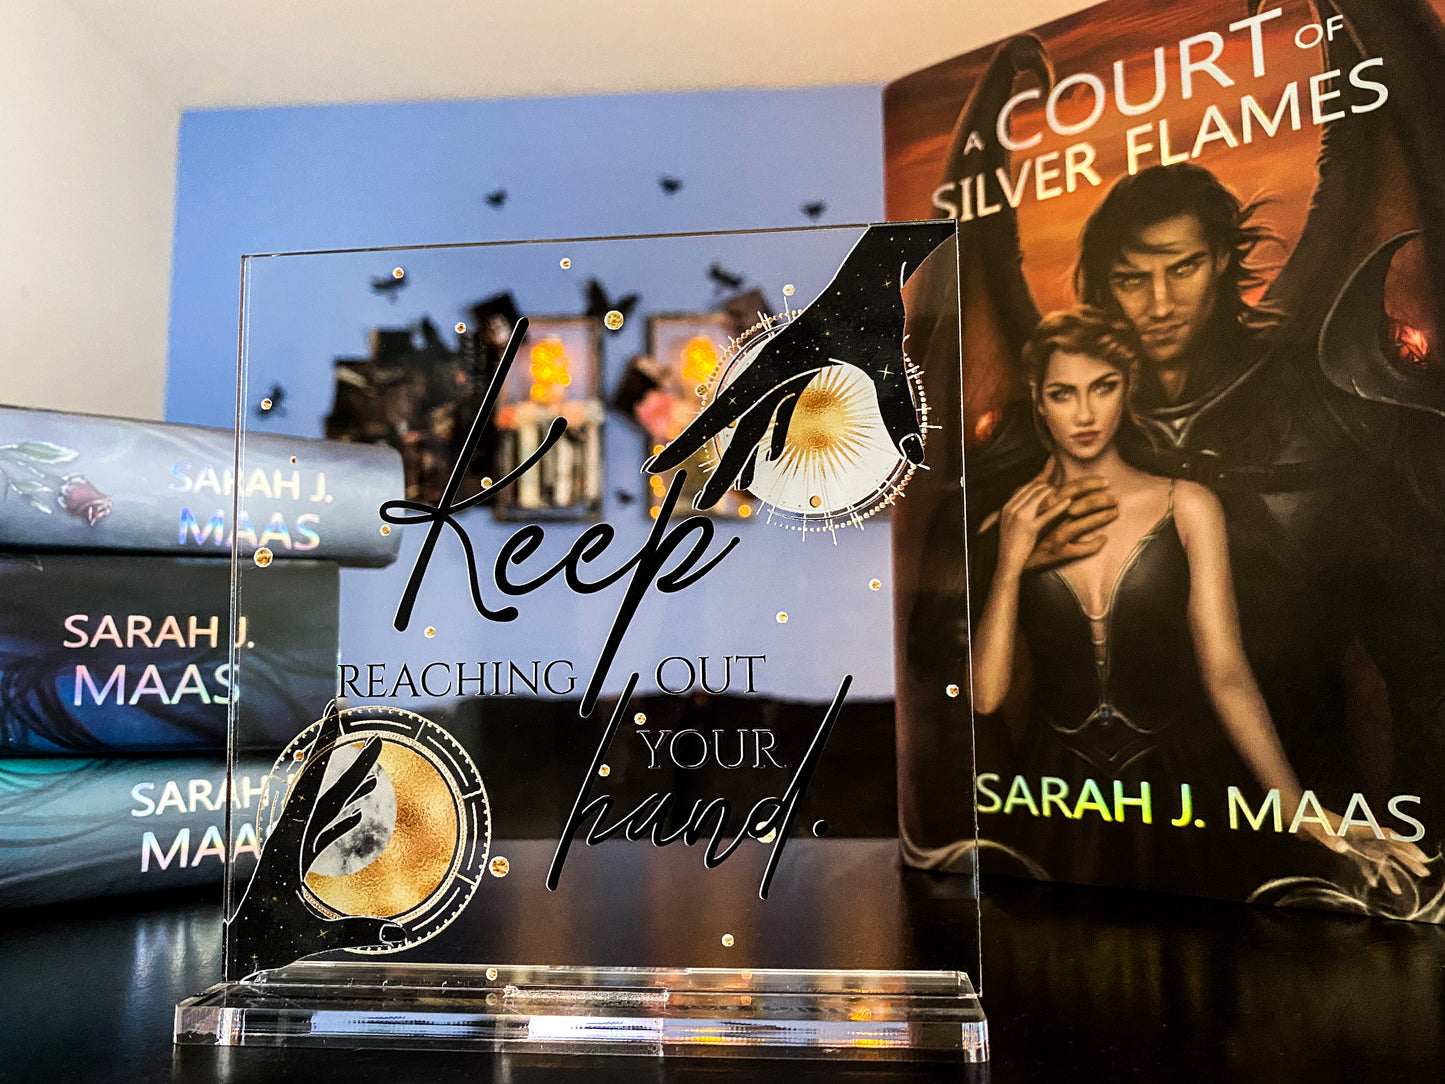 "Keep reaching out your hand." - A Court of Thorns and Roses Series / A Court of Silver Flames - Freestanding Bookshelf / Desktop Acrylic Accessory - Officially licensed by Sarah J. Maas - D7